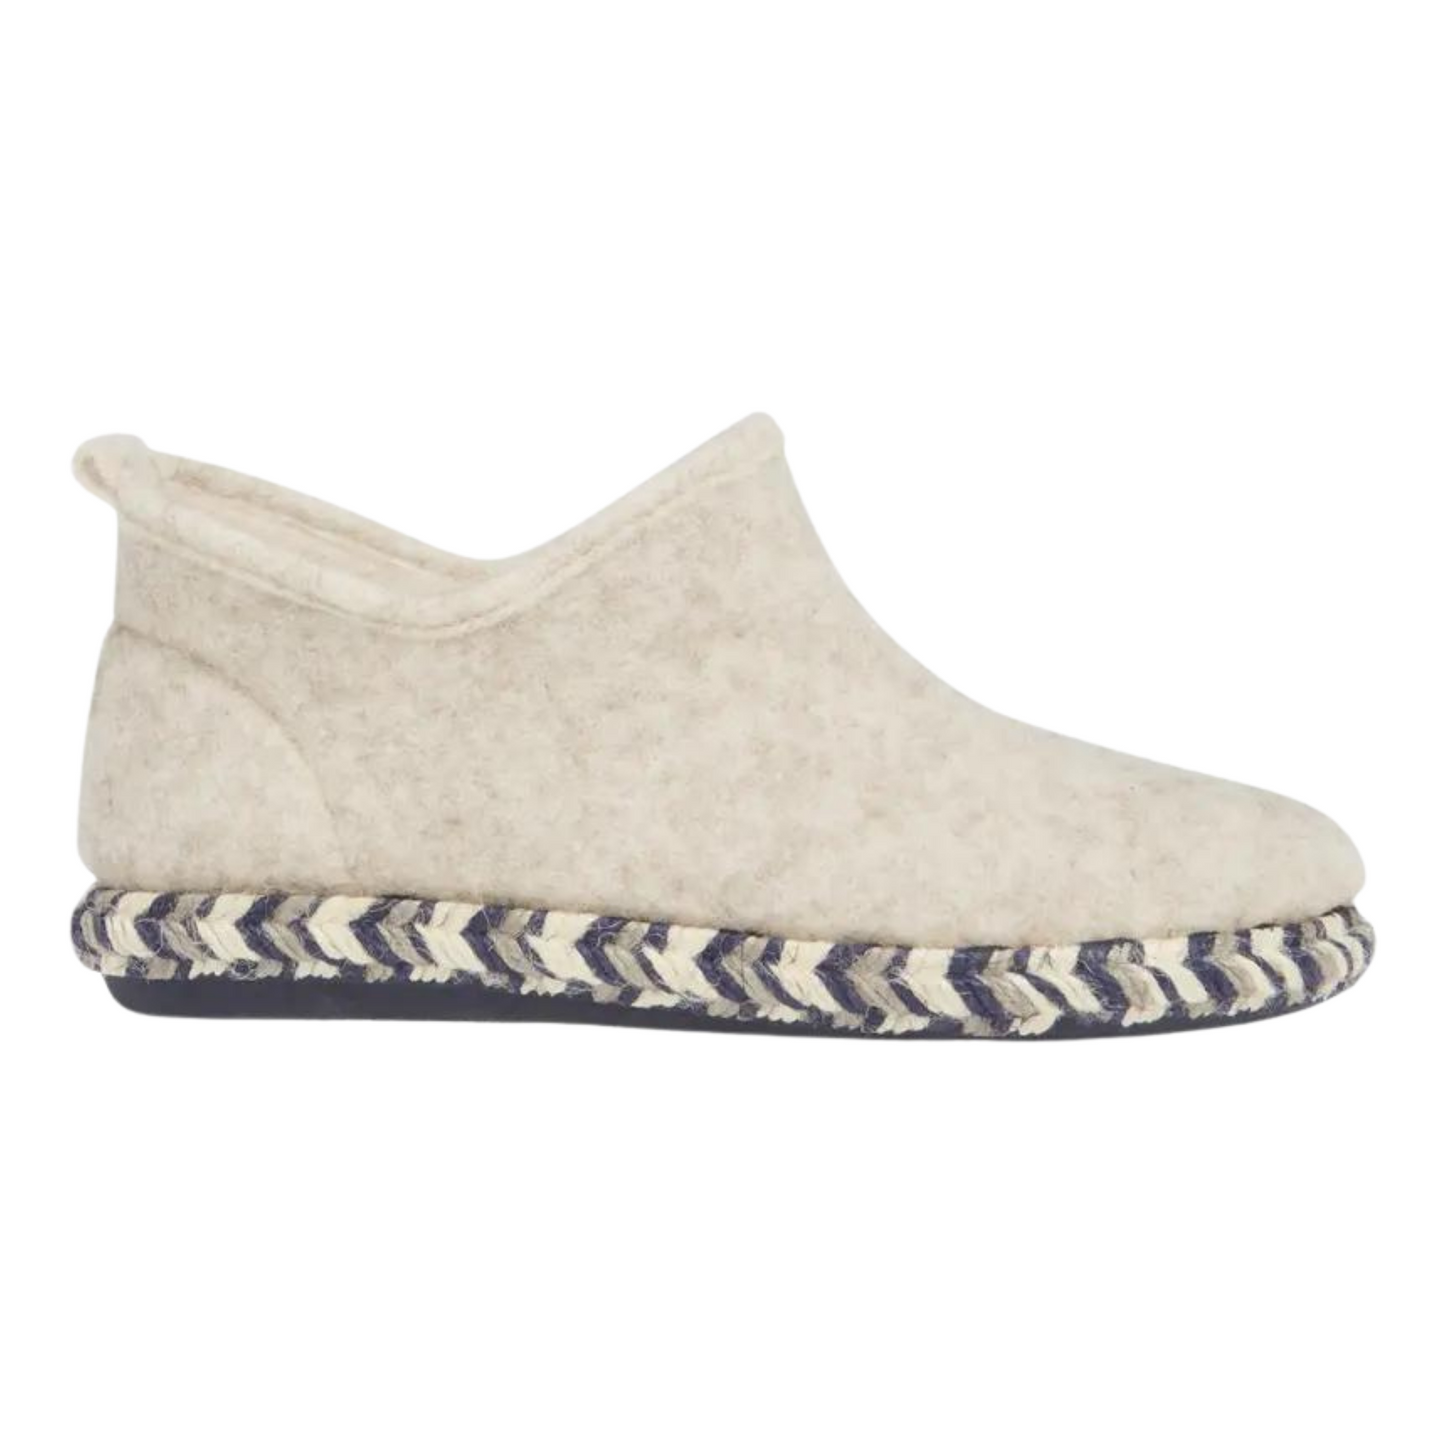 Profile image of a cream coloured slipper with chevron stitched sole with black, white, and beige threads.